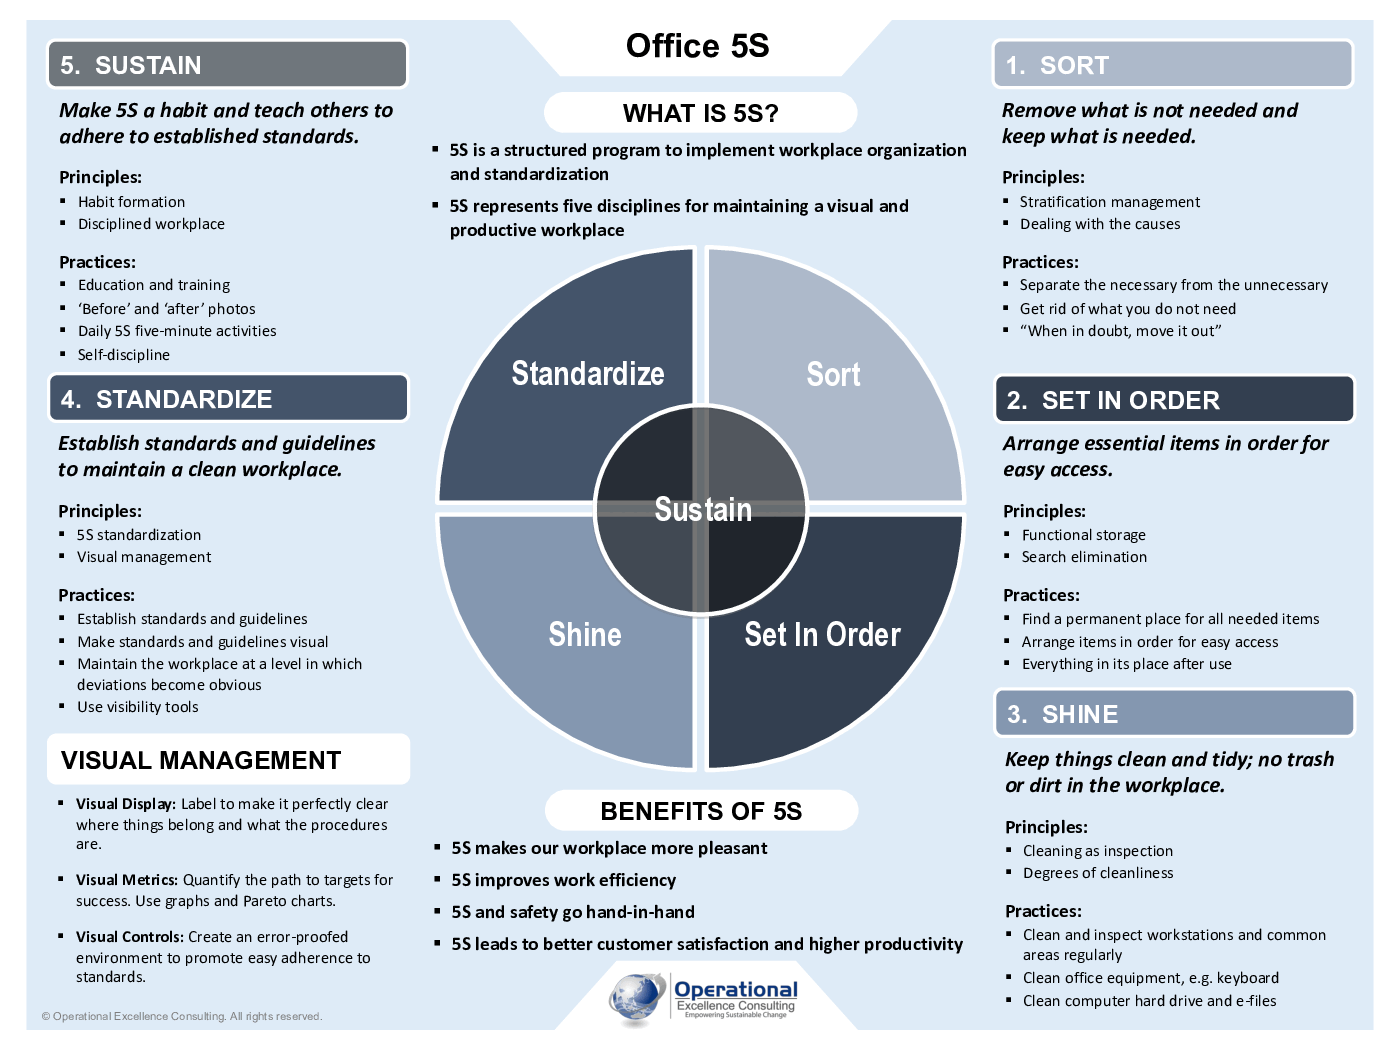 Office 5S Poster